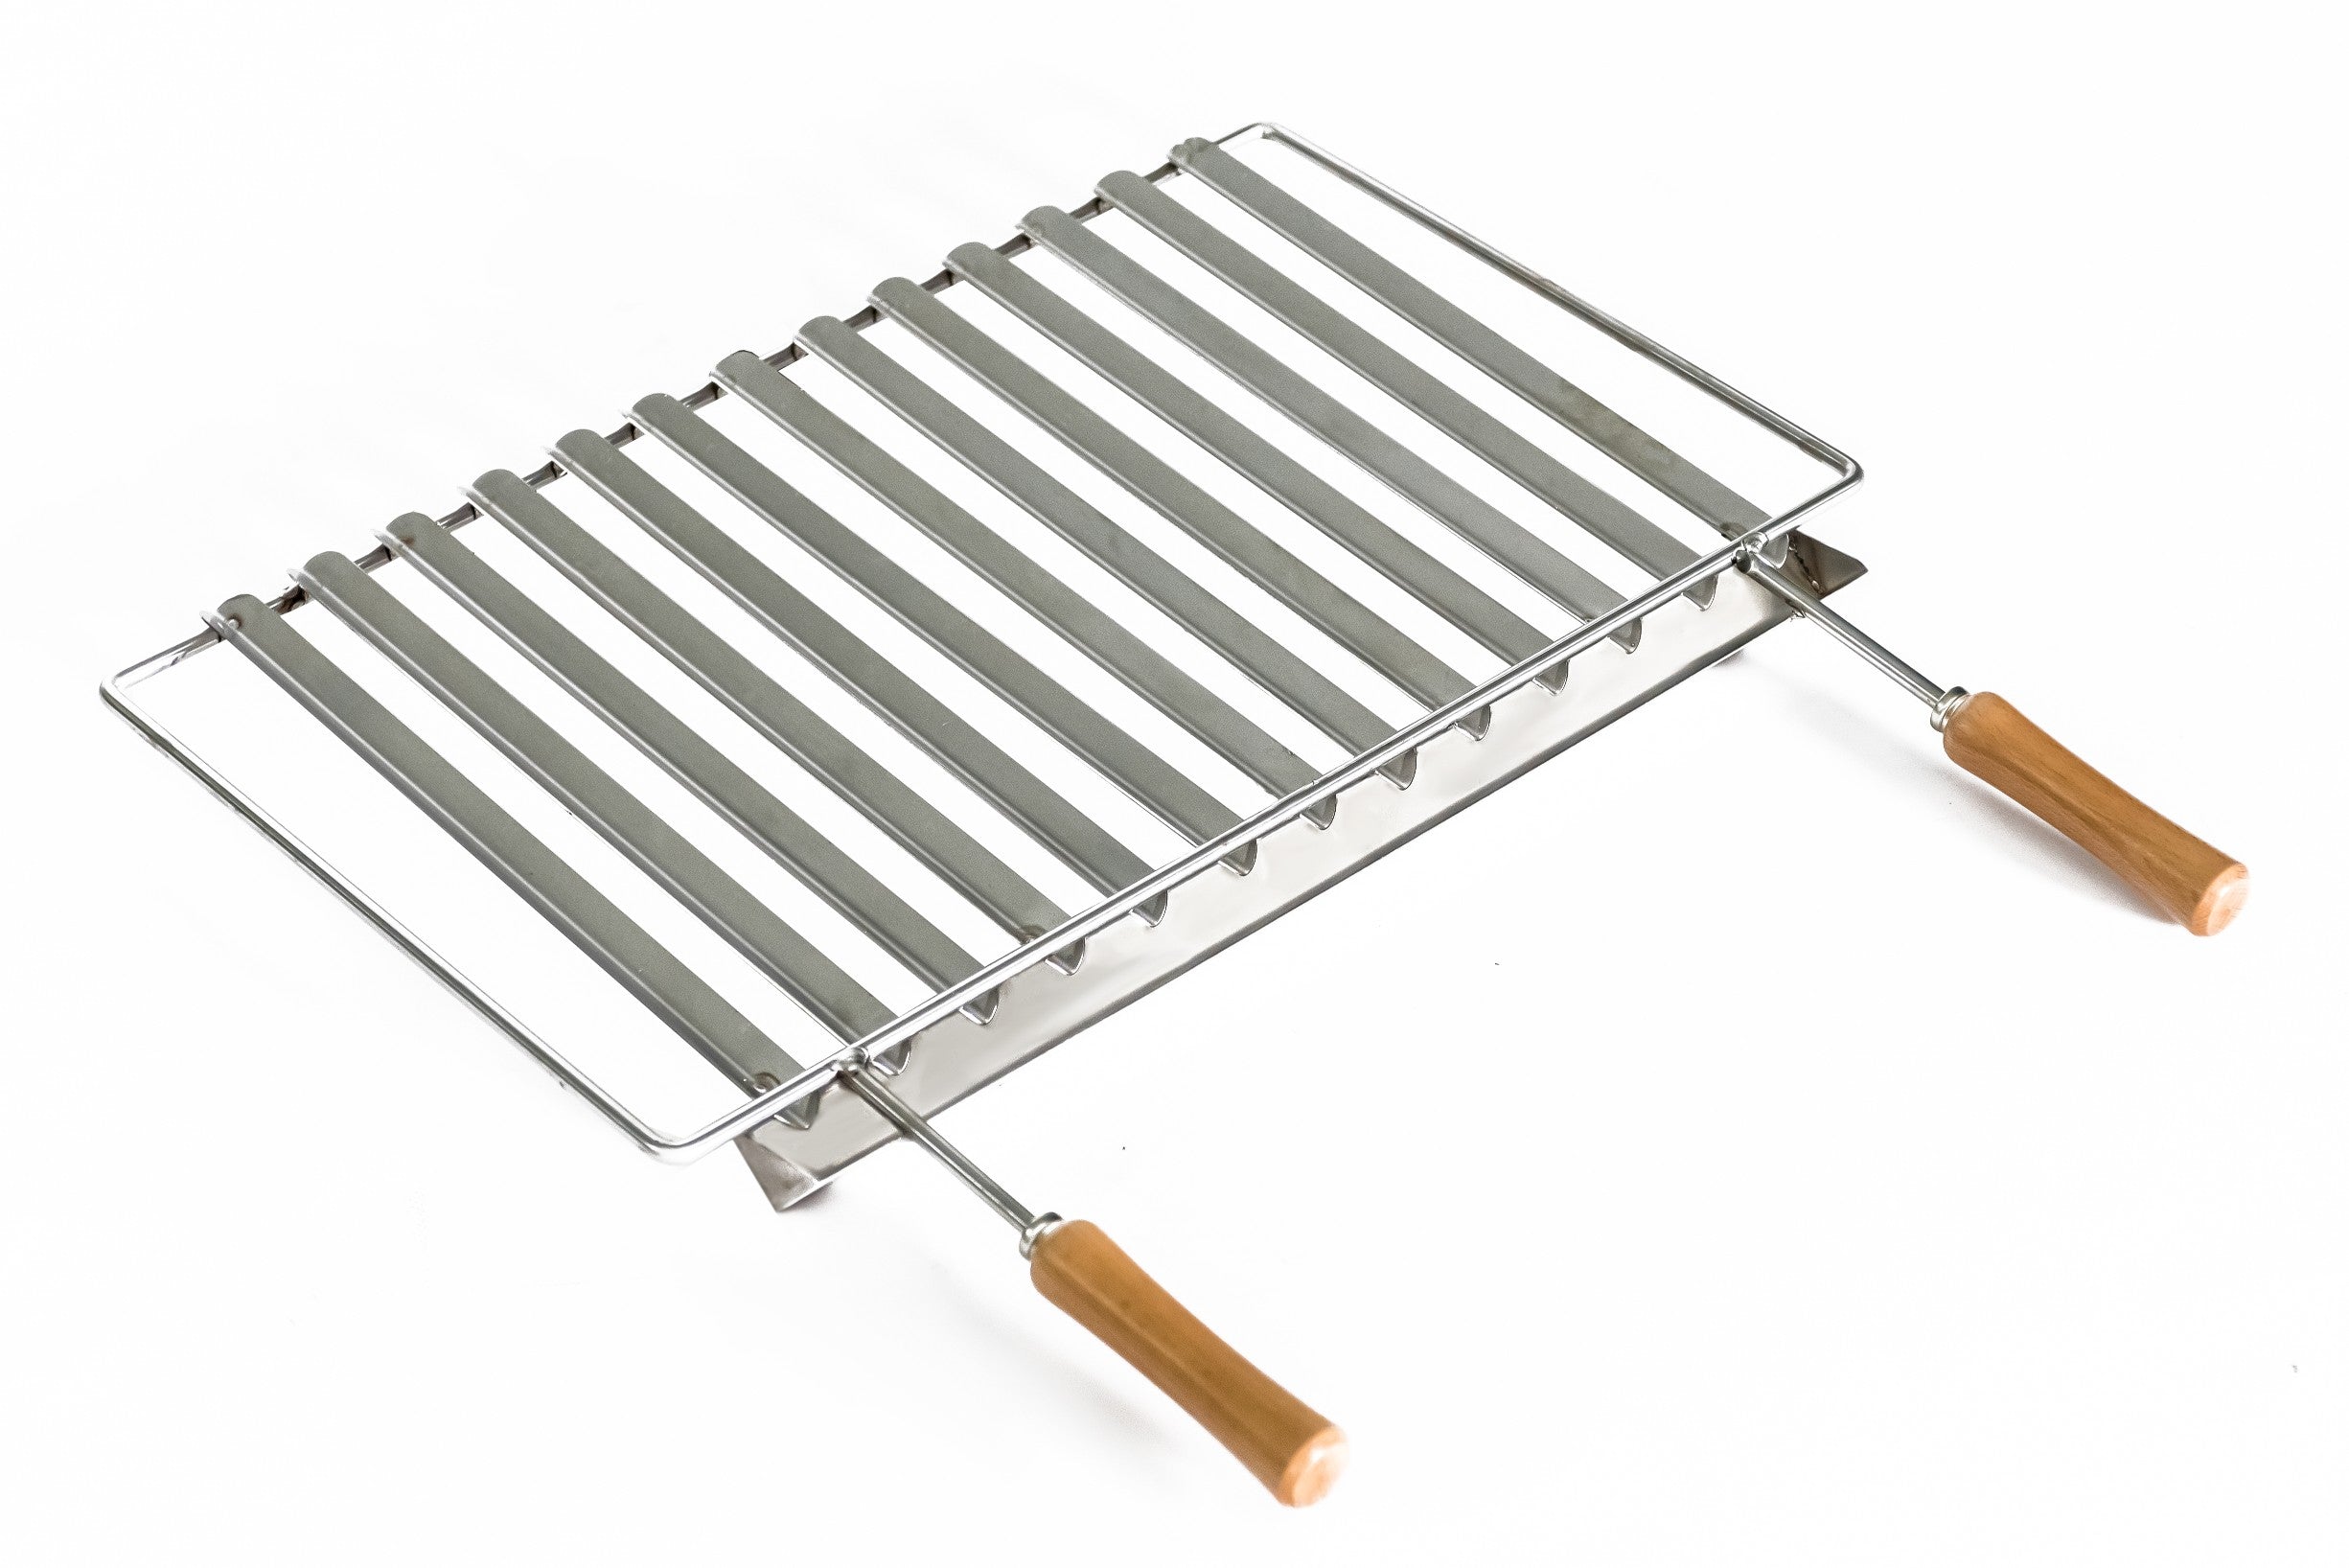 Argentine Grill in Stainless Steel